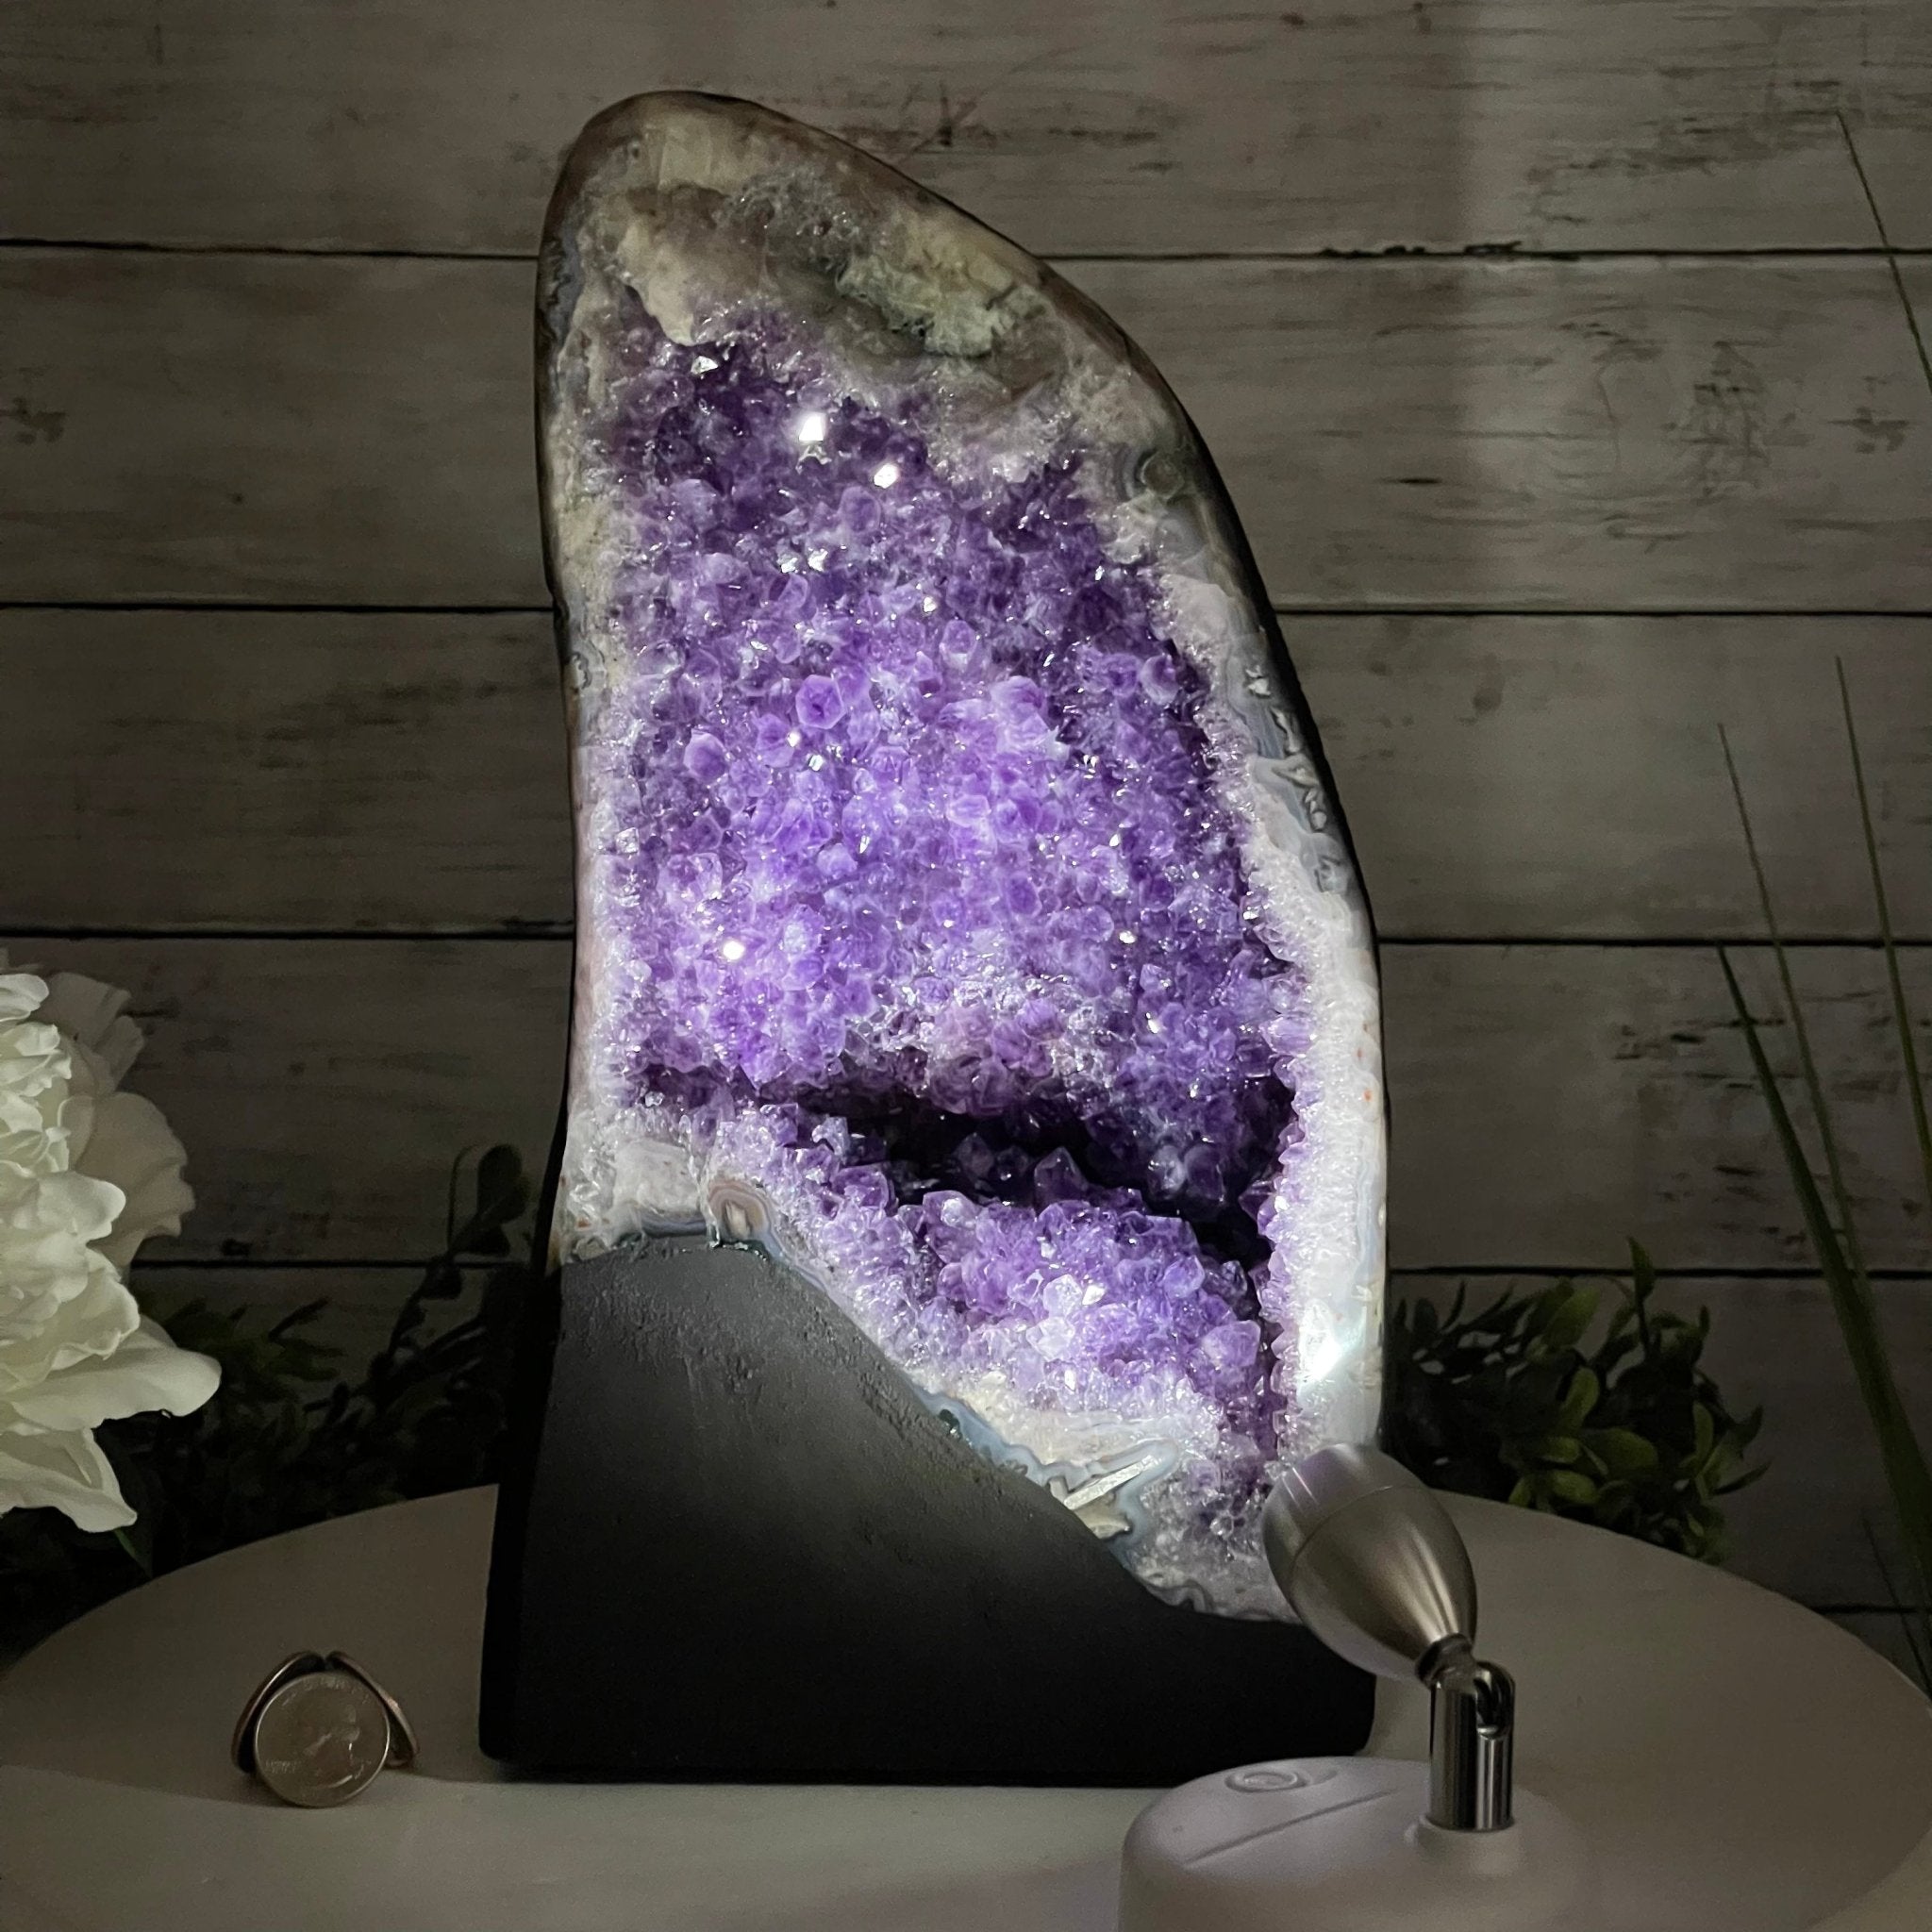 Super Quality Brazilian Amethyst Cathedral, 13.8 lbs & 12" Tall #5601-1024 by Brazil Gems - Brazil GemsBrazil GemsSuper Quality Brazilian Amethyst Cathedral, 13.8 lbs & 12" Tall #5601-1024 by Brazil GemsCathedrals5601-1024